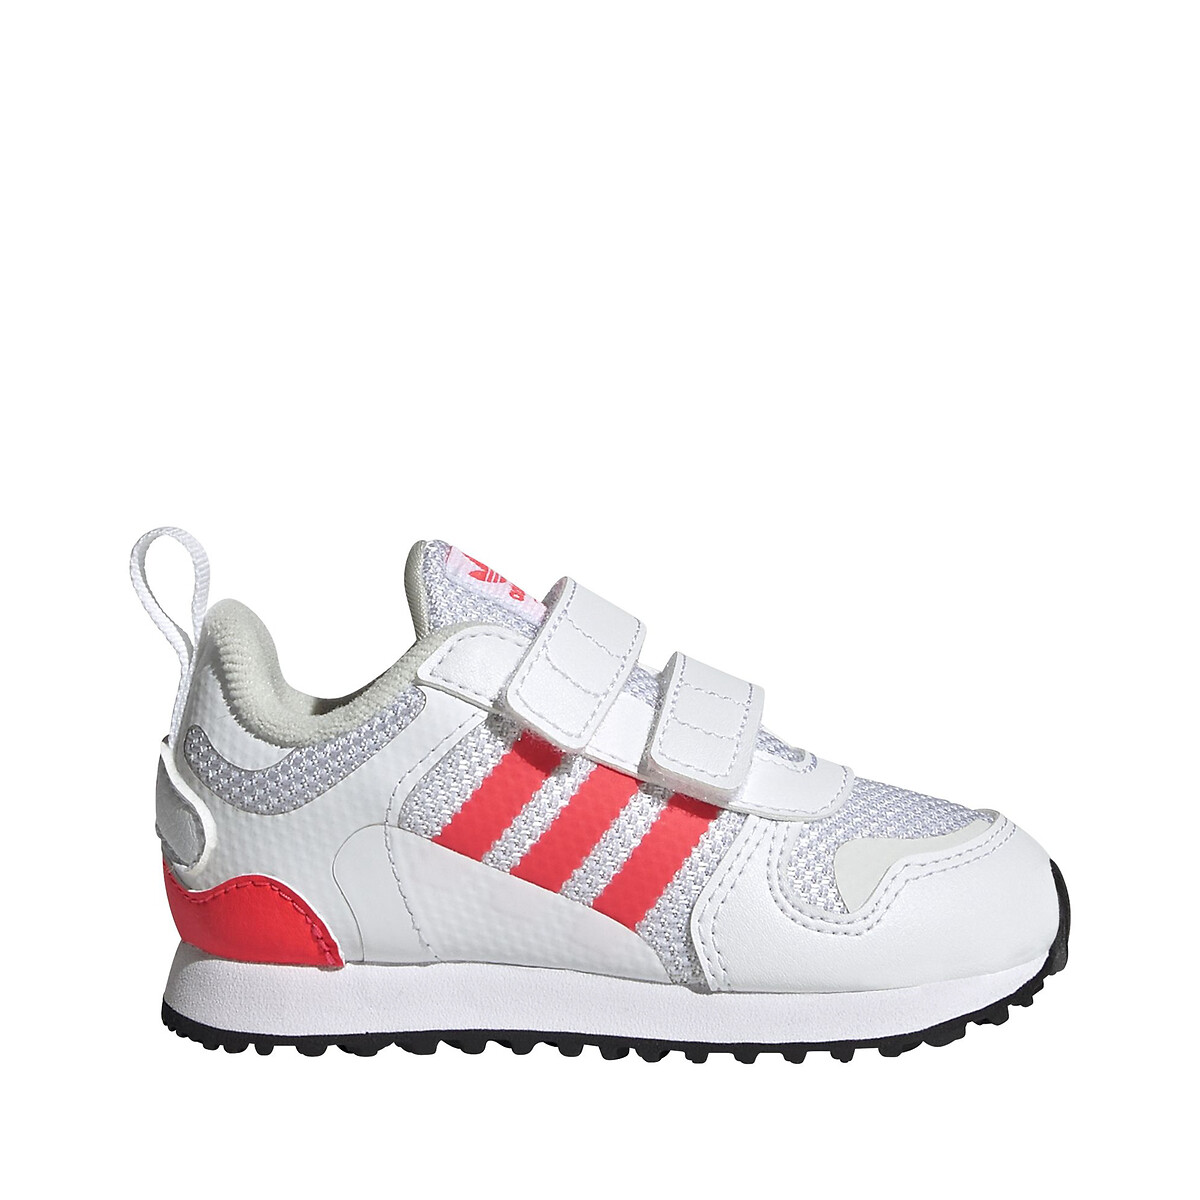 Kids zx 700 hd trainers with touch 'n' close fastening , white, Adidas ...